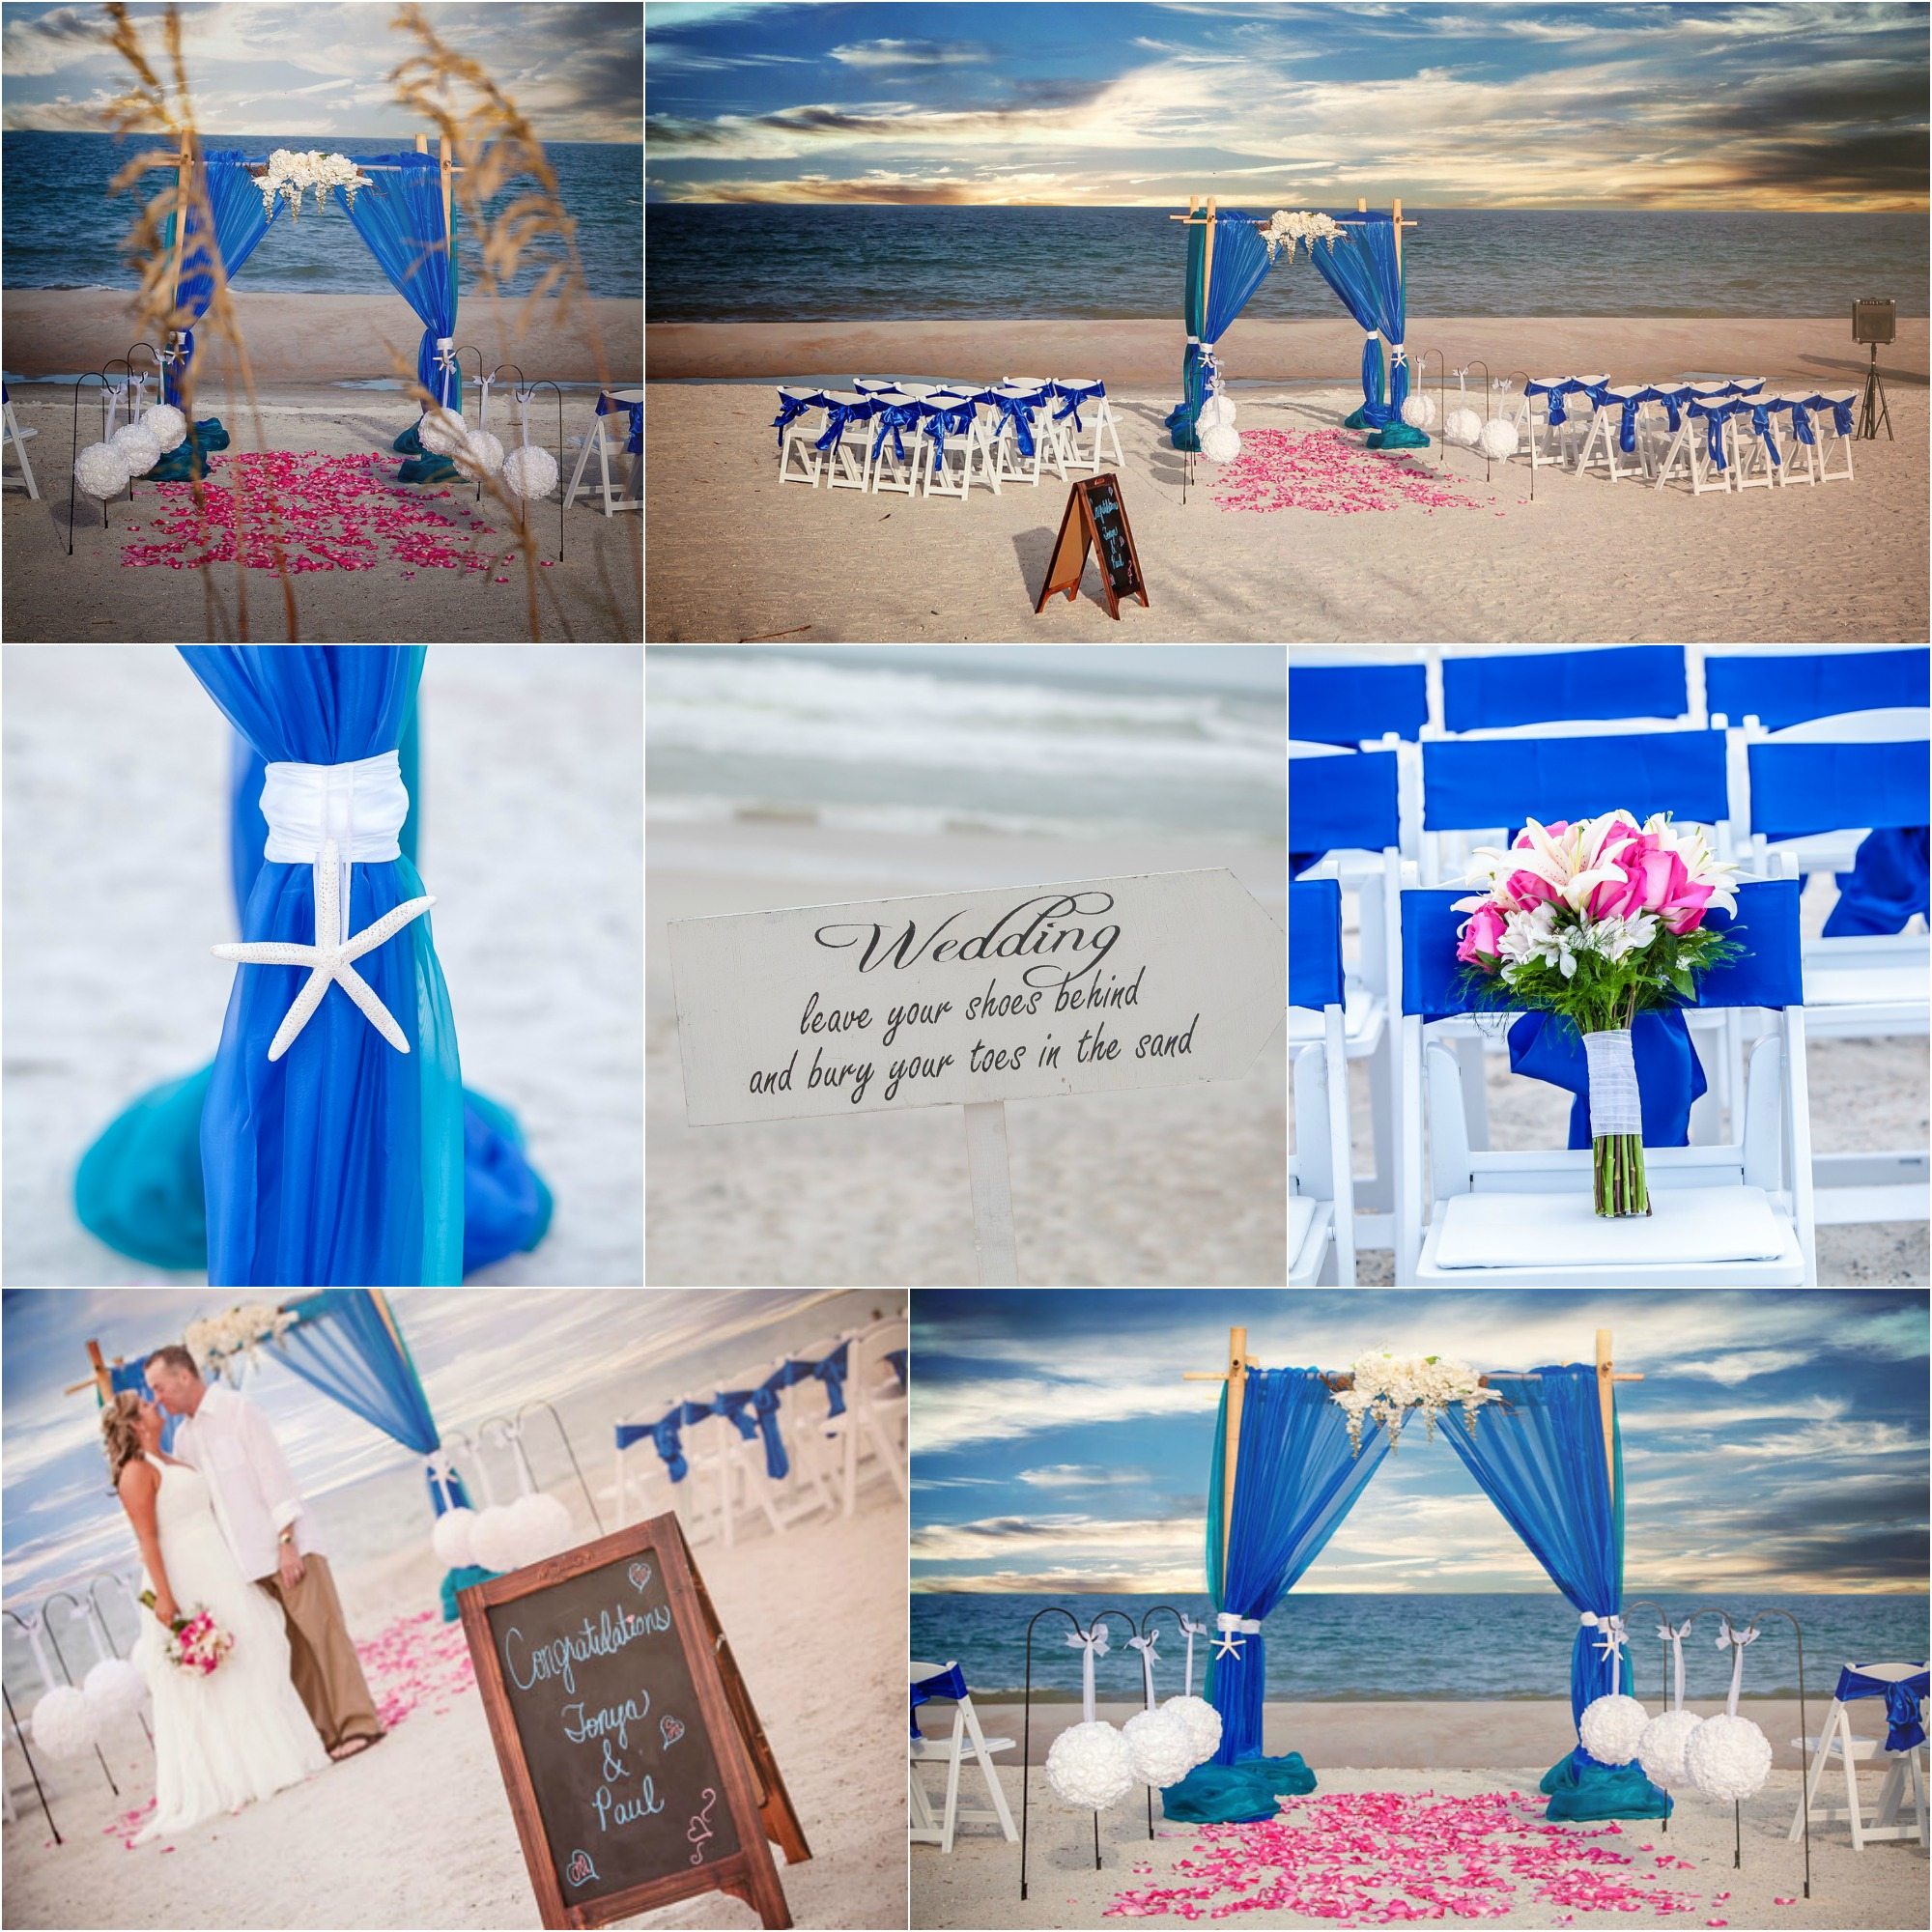 Amelia Island Wedding Packages. Florida BEach Wedding and Reception Packages